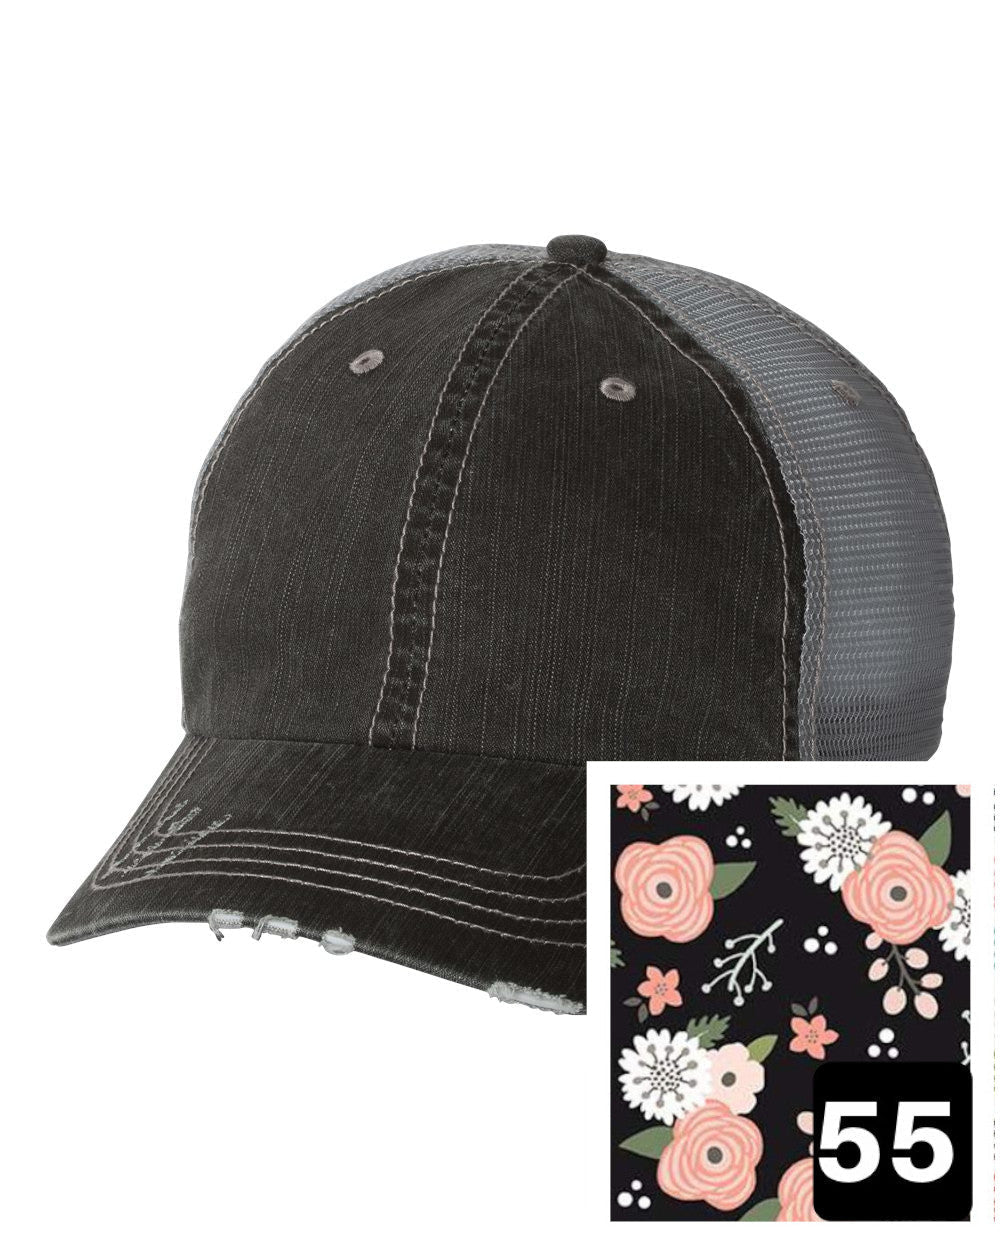 gray distressed trucker hat with petite floral on navy fabric state of Arizona